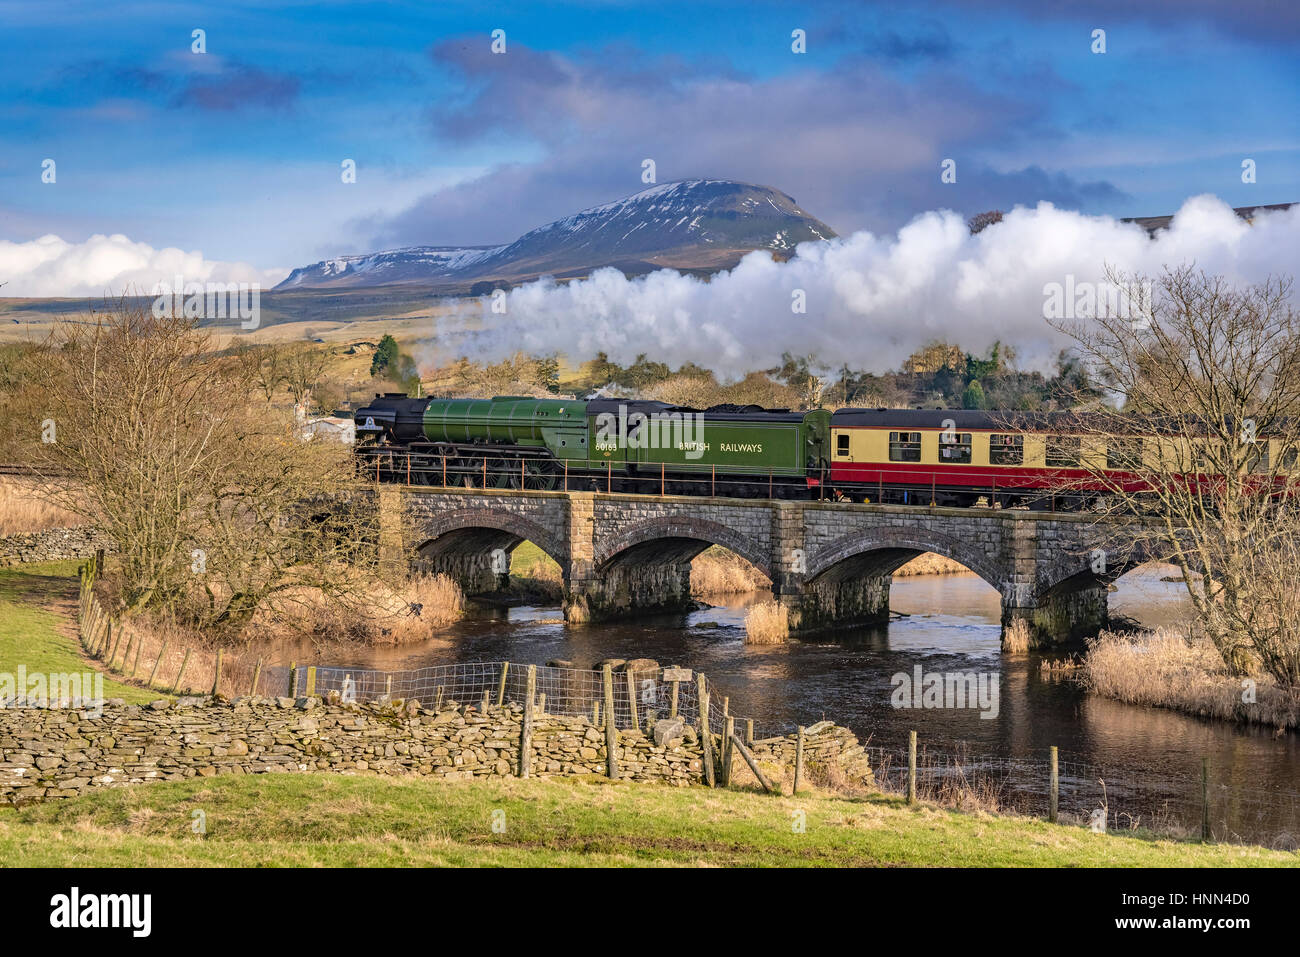 Helwith Bridge. North Yorkshire. North West England. Wednesday 15th February 2017. The Peppercorn steam engine Tornado on the secnond day of hauling scheduled trains between Skipton and Appleby on the Settle to Carlisle railway. The services are the first schedueld steam hauled services on British rail for 50 years. The train is pictured passing over Helwith Bridge with the towering Pen Y Ghent in the background. Credit: John Davidson/Alamy Live News. Stock Photo